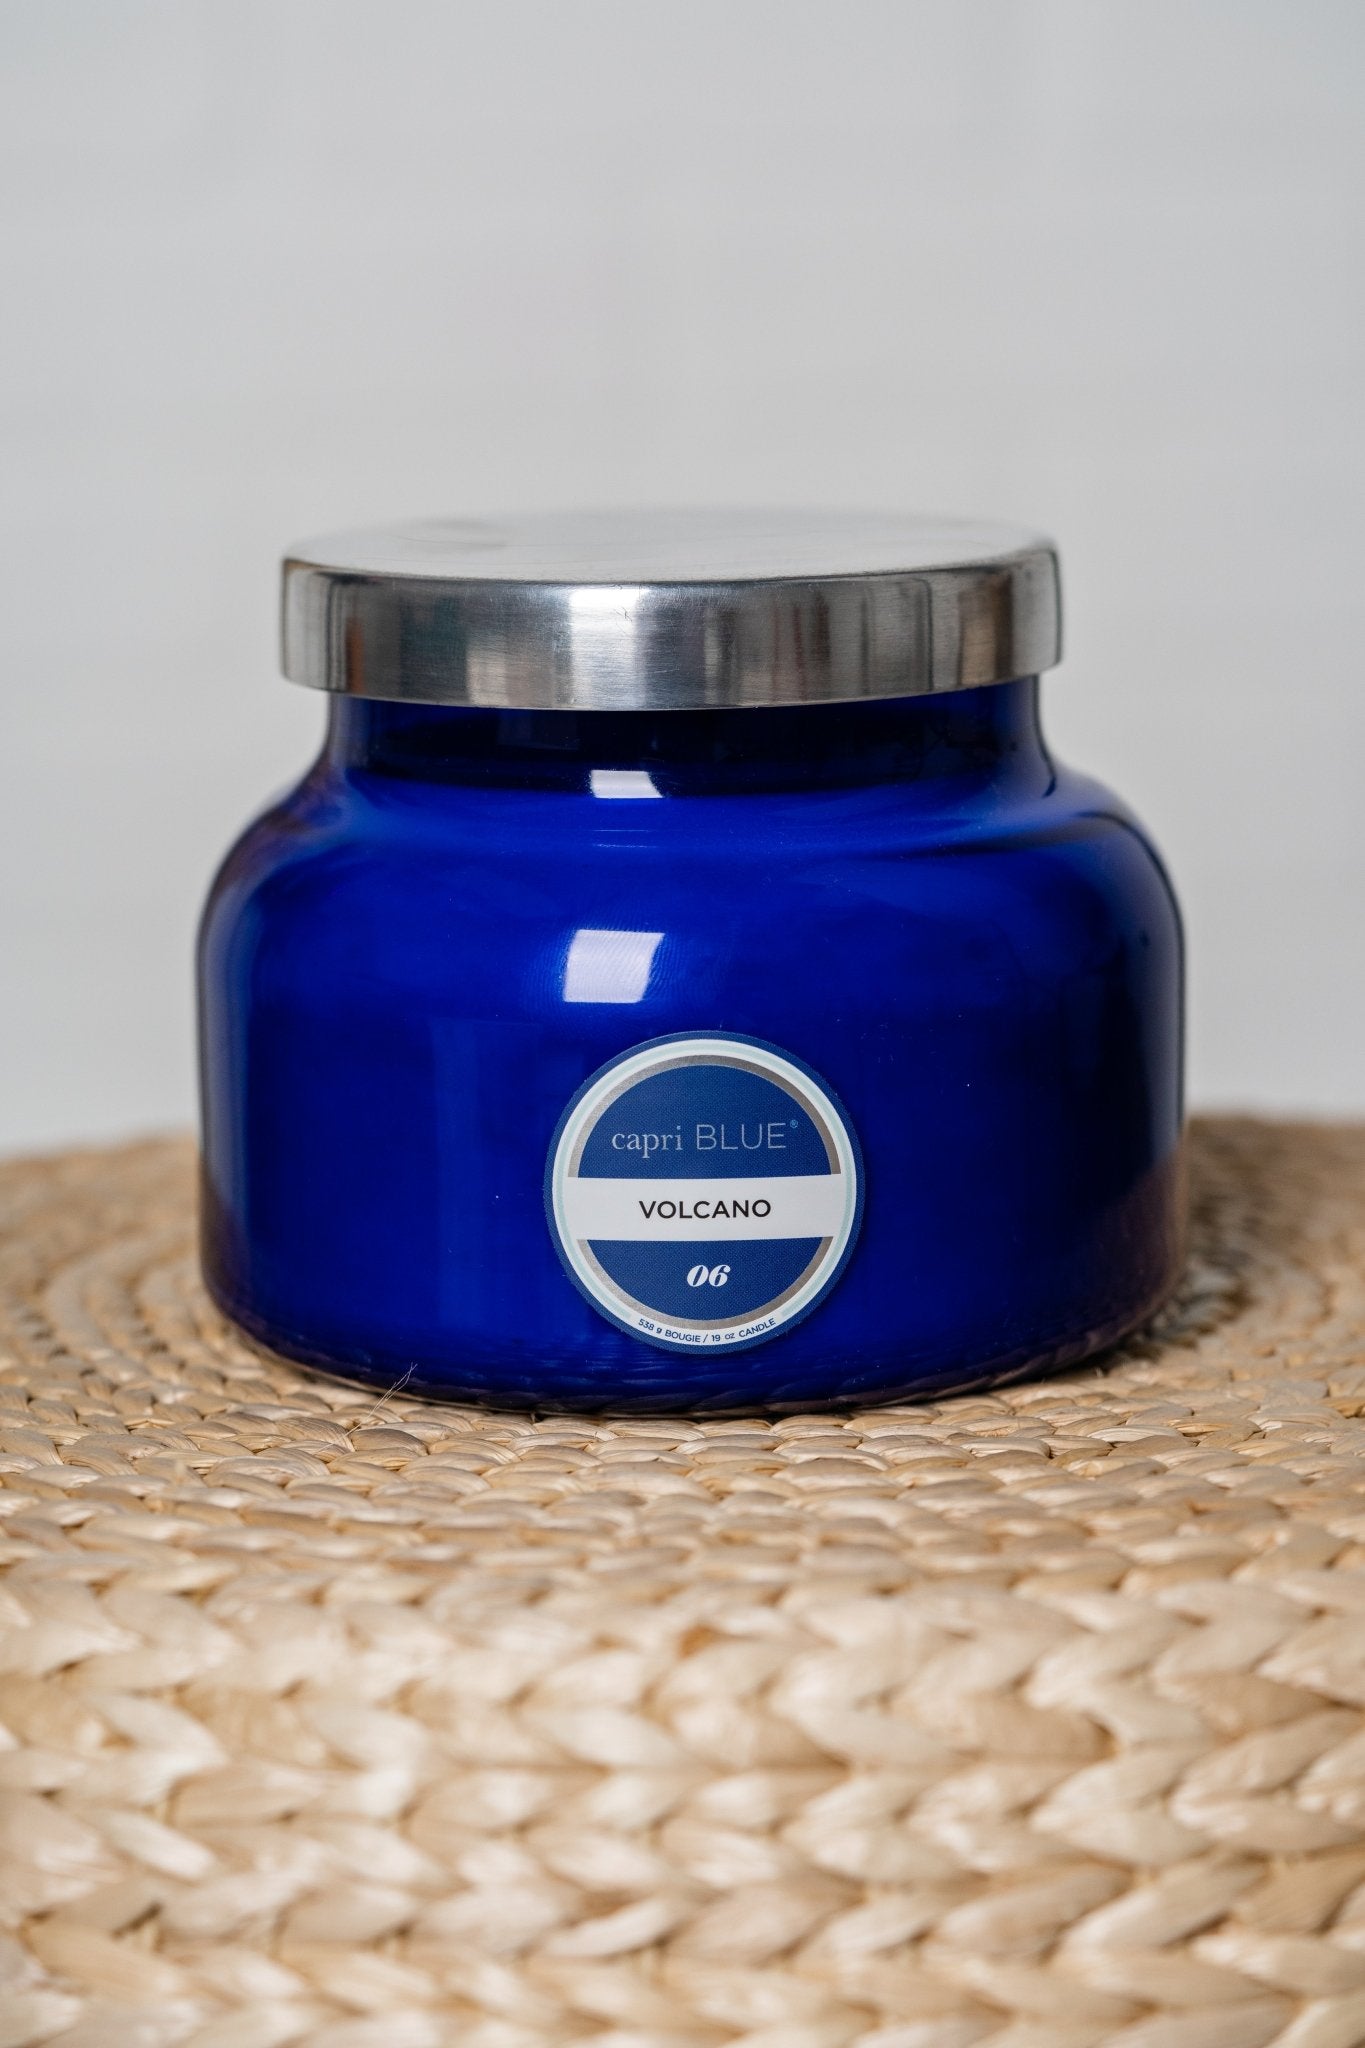 Capri Blue volcano scent 19 oz candle blue - Trendy Candles and Scents at Lush Fashion Lounge Boutique in Oklahoma City